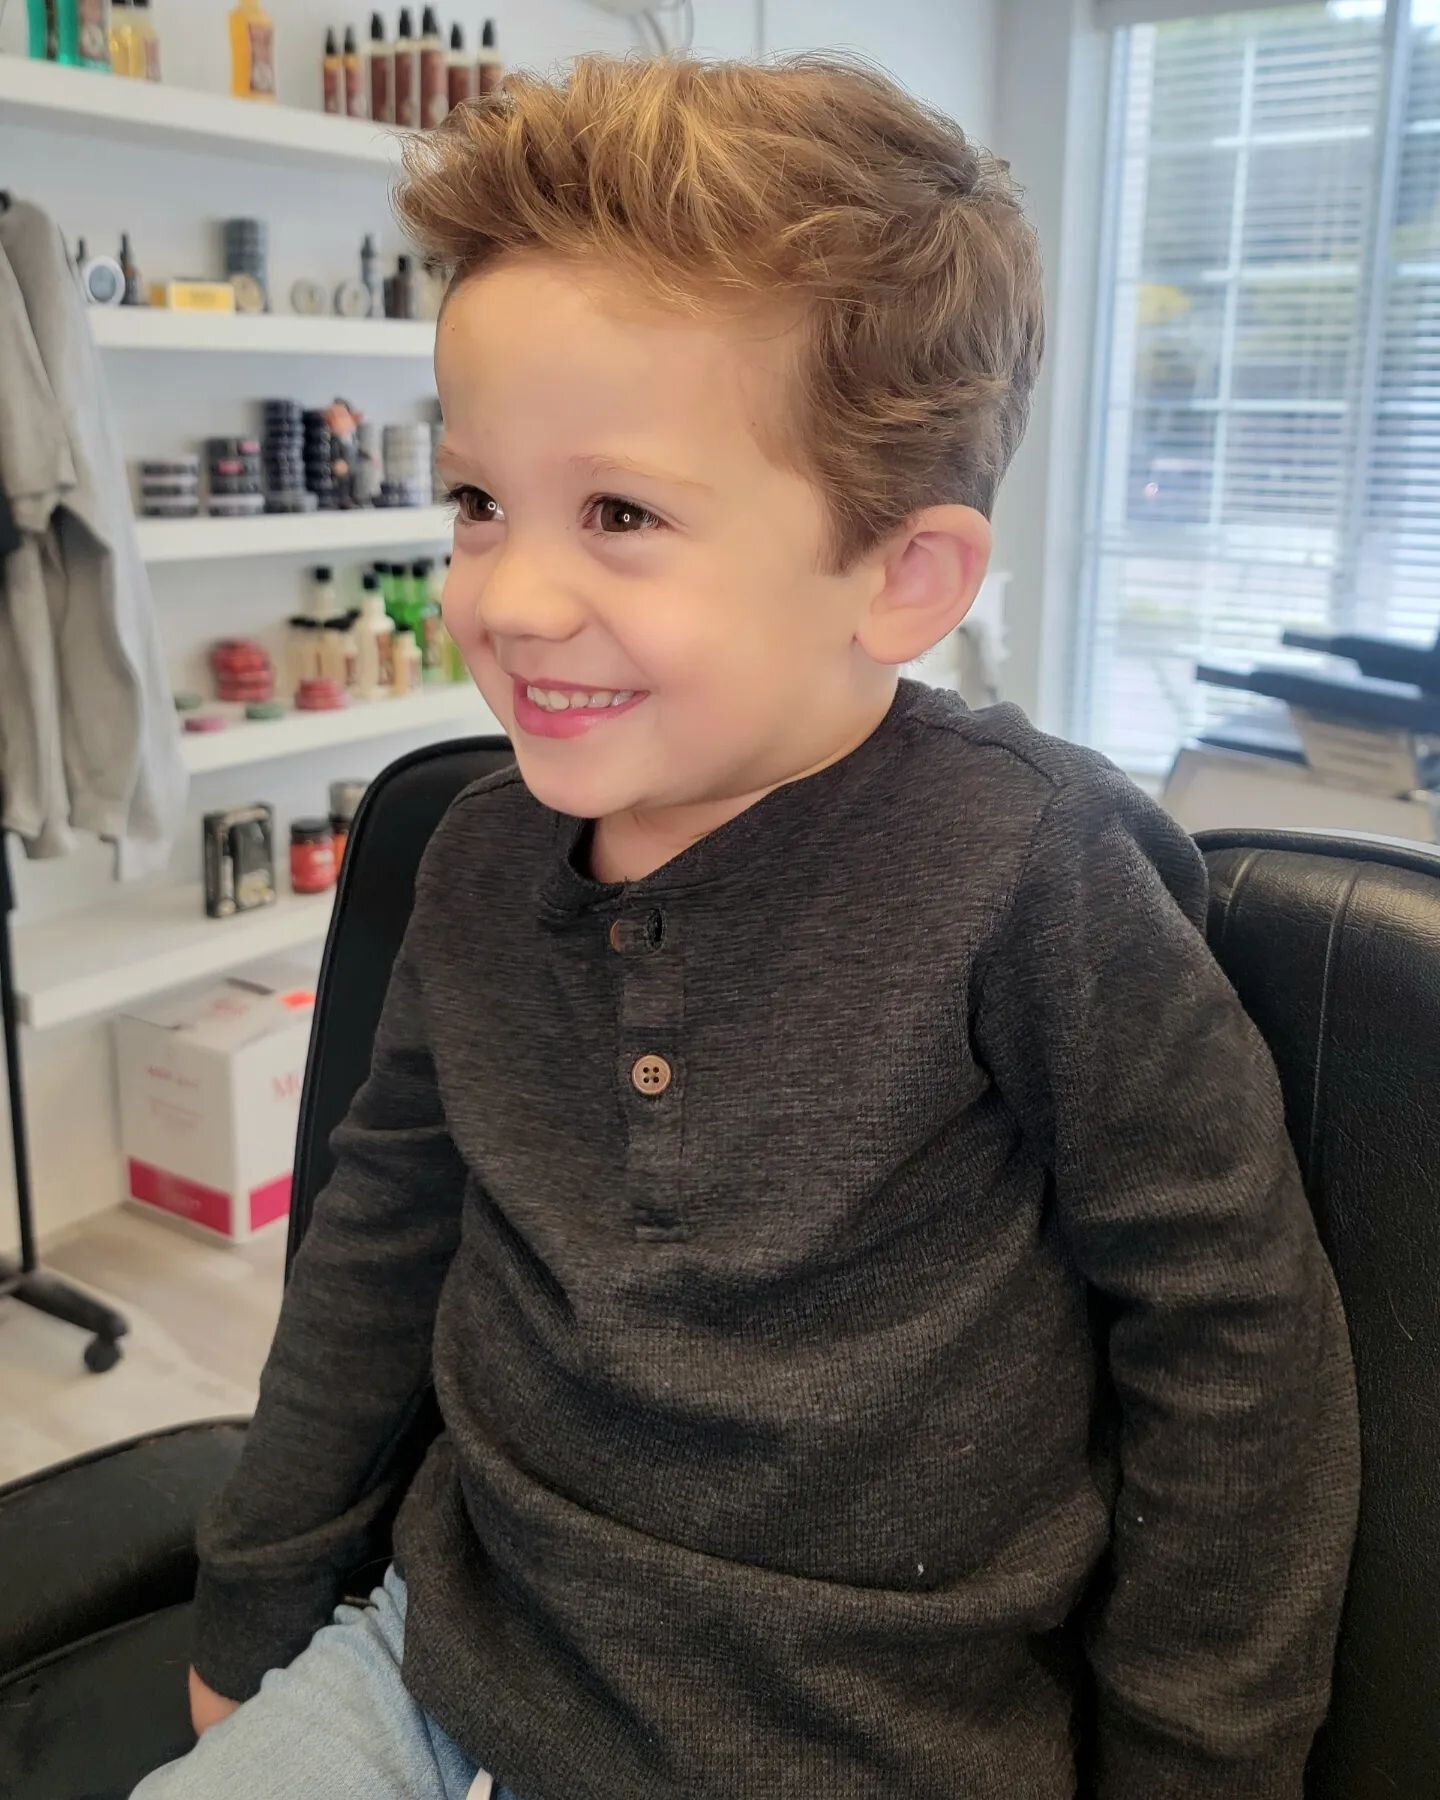 Hair is such a big part of our lives, and is no doubt one of the most important physical attributes as it tells people about our personality and style. His smile says it all 🥰

#kitchener #kitchenerwaterloo #kwawesome #uptownwaterloo #waterlooregion